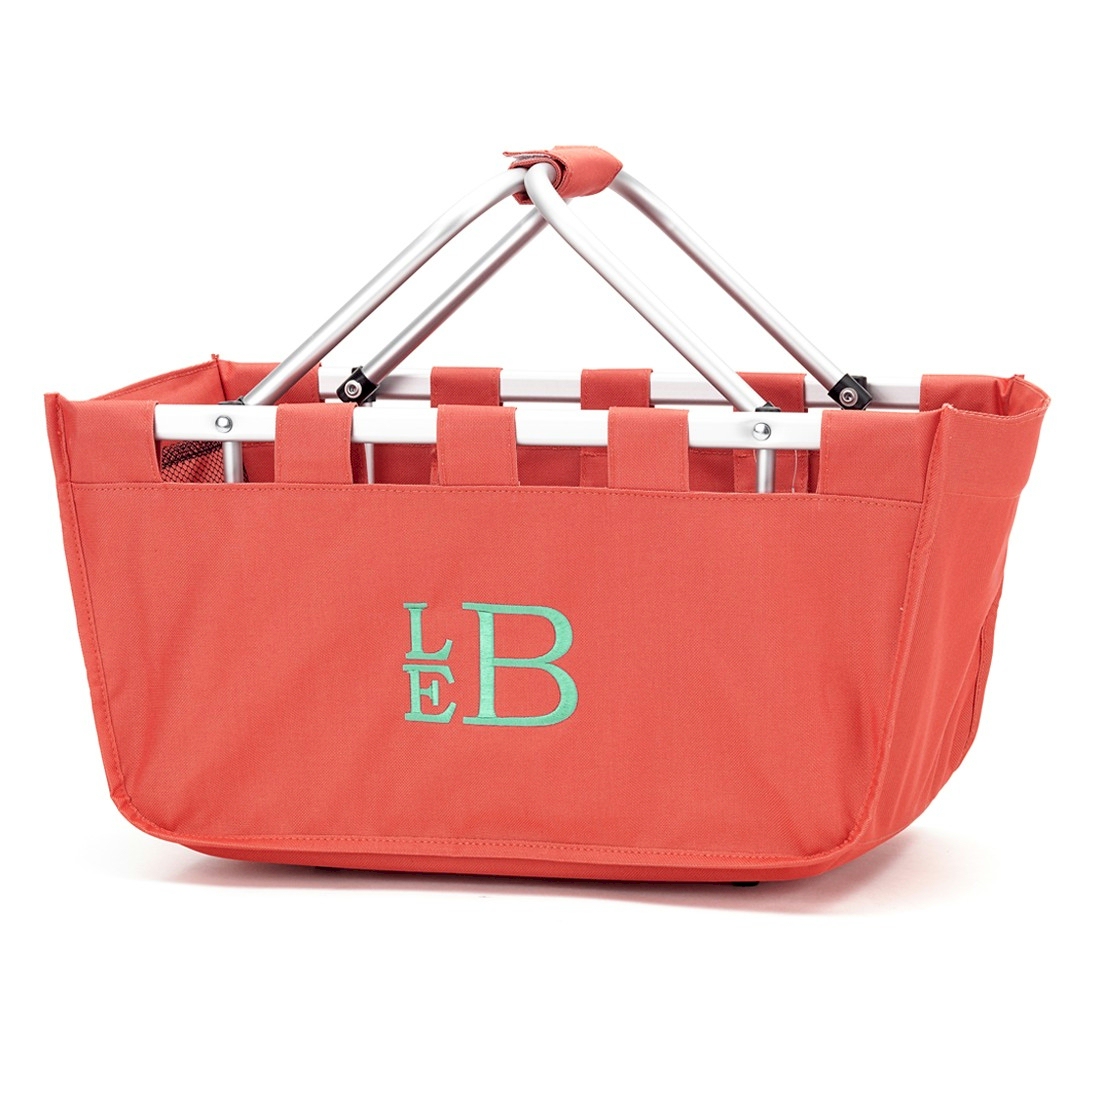 Foldable Market Tote Embroidery Blanks - CORAL